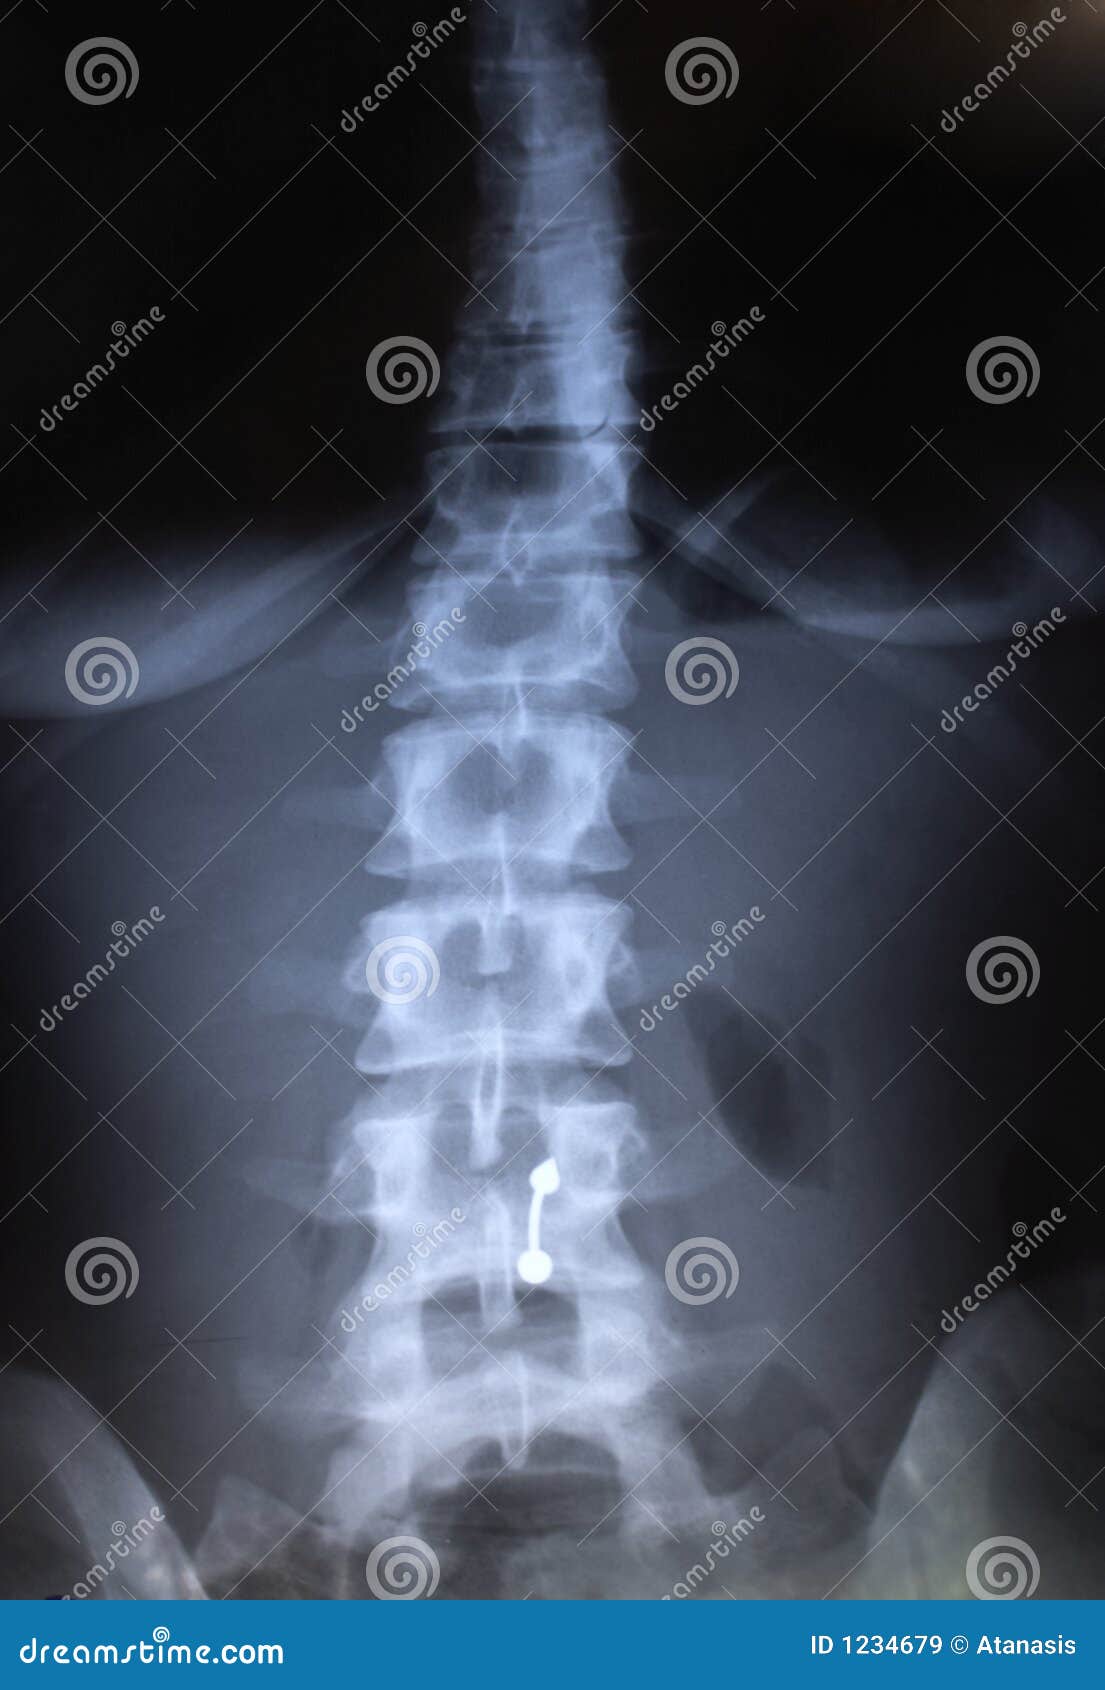 spine radiography - x rays